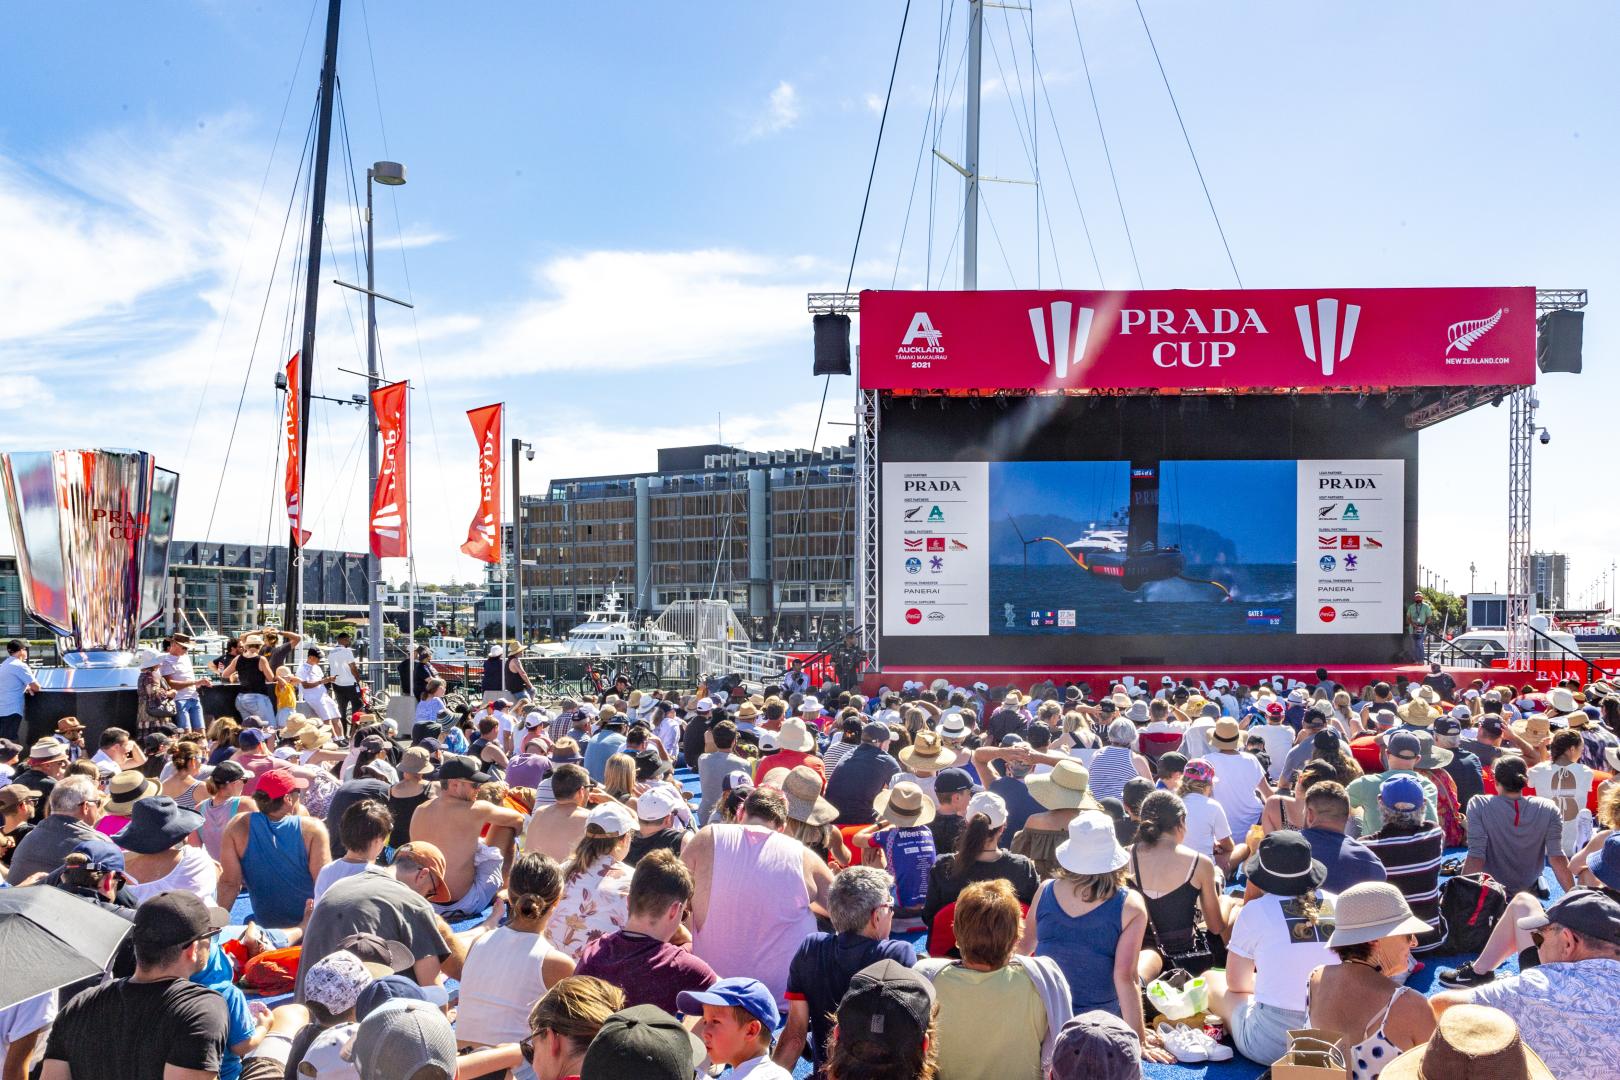 America’s Cup Event position on continuation of racing